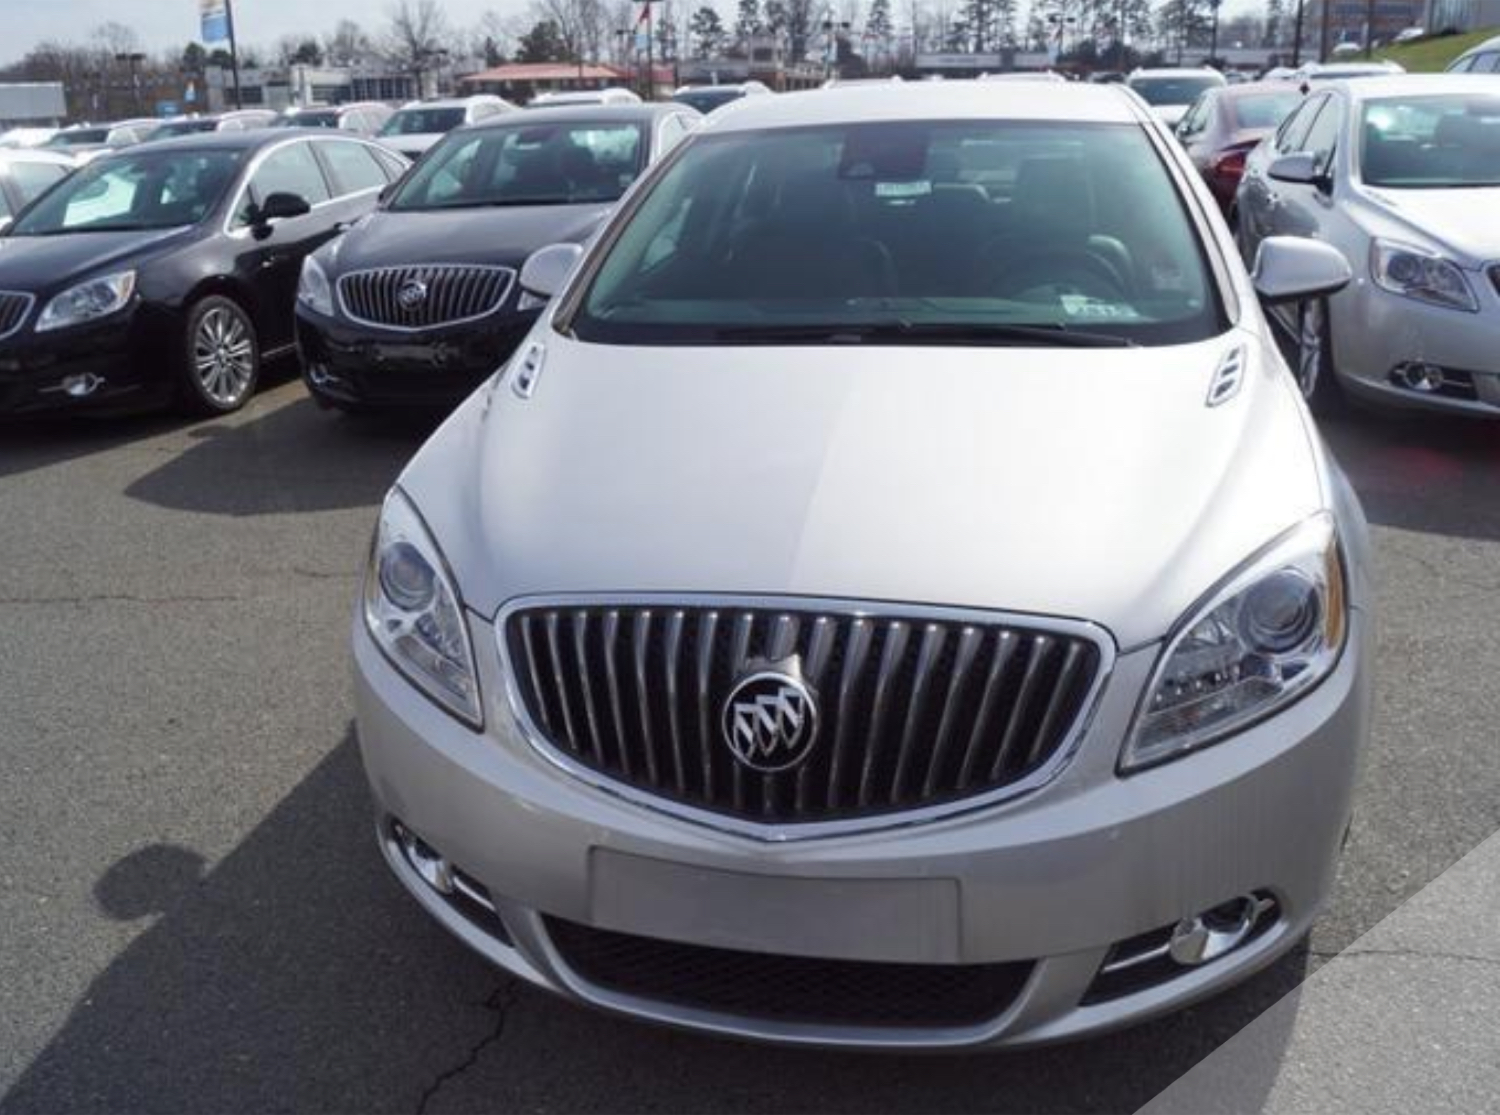 Dealer Find: New 2016 Buick Verano For Sale | GM Authority